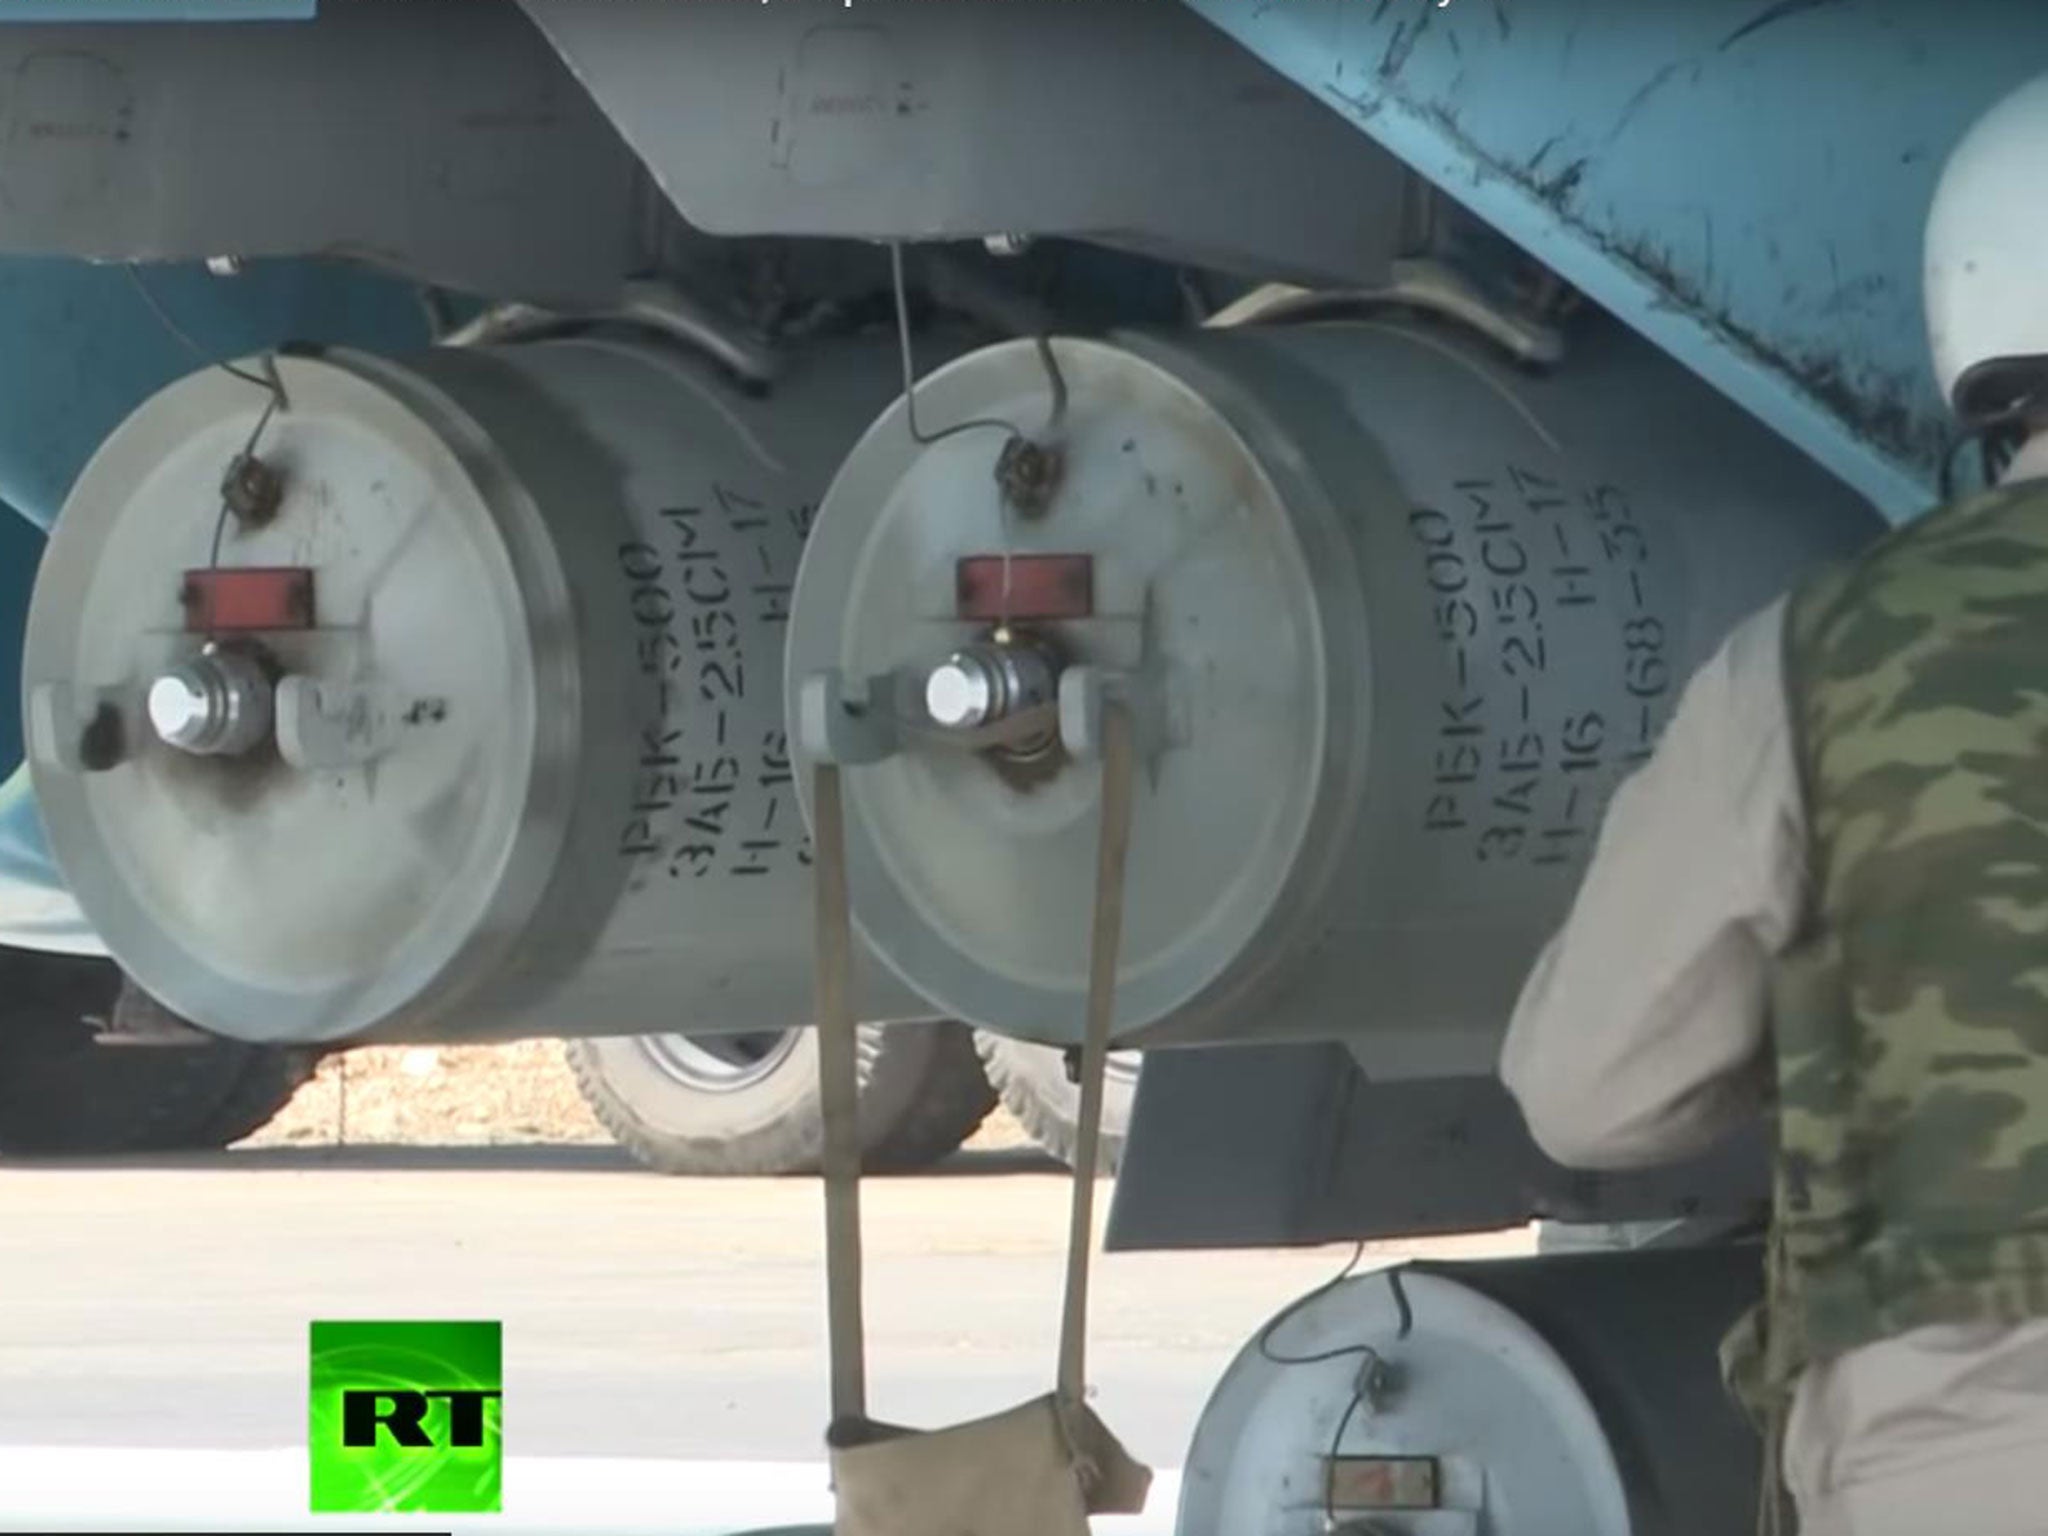 Footage showing what analysts identified as RBK-500 ZAB-2.5SM cluster bombs loaded on a Russian jet at Khmeimim air base in Syria on 18 June 2016